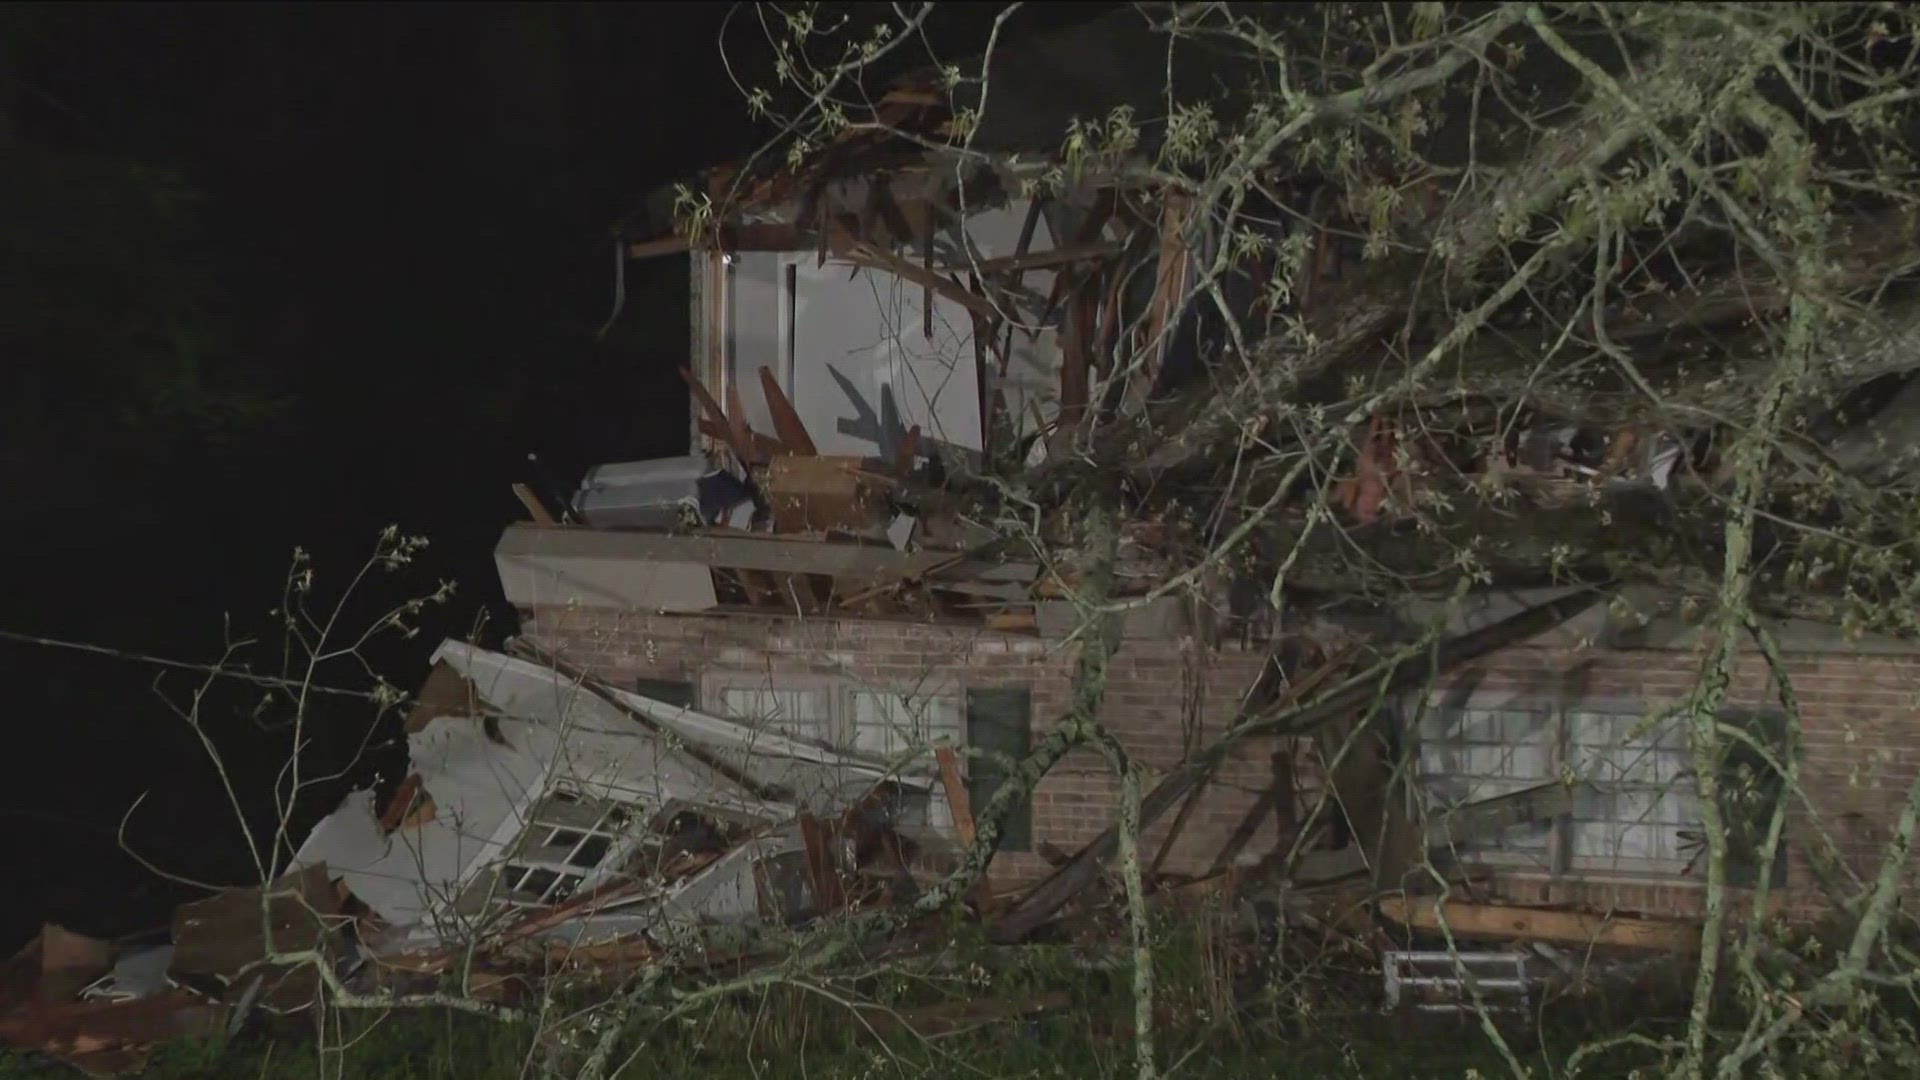 Much of the worst damage appears to be in DeKalb County.